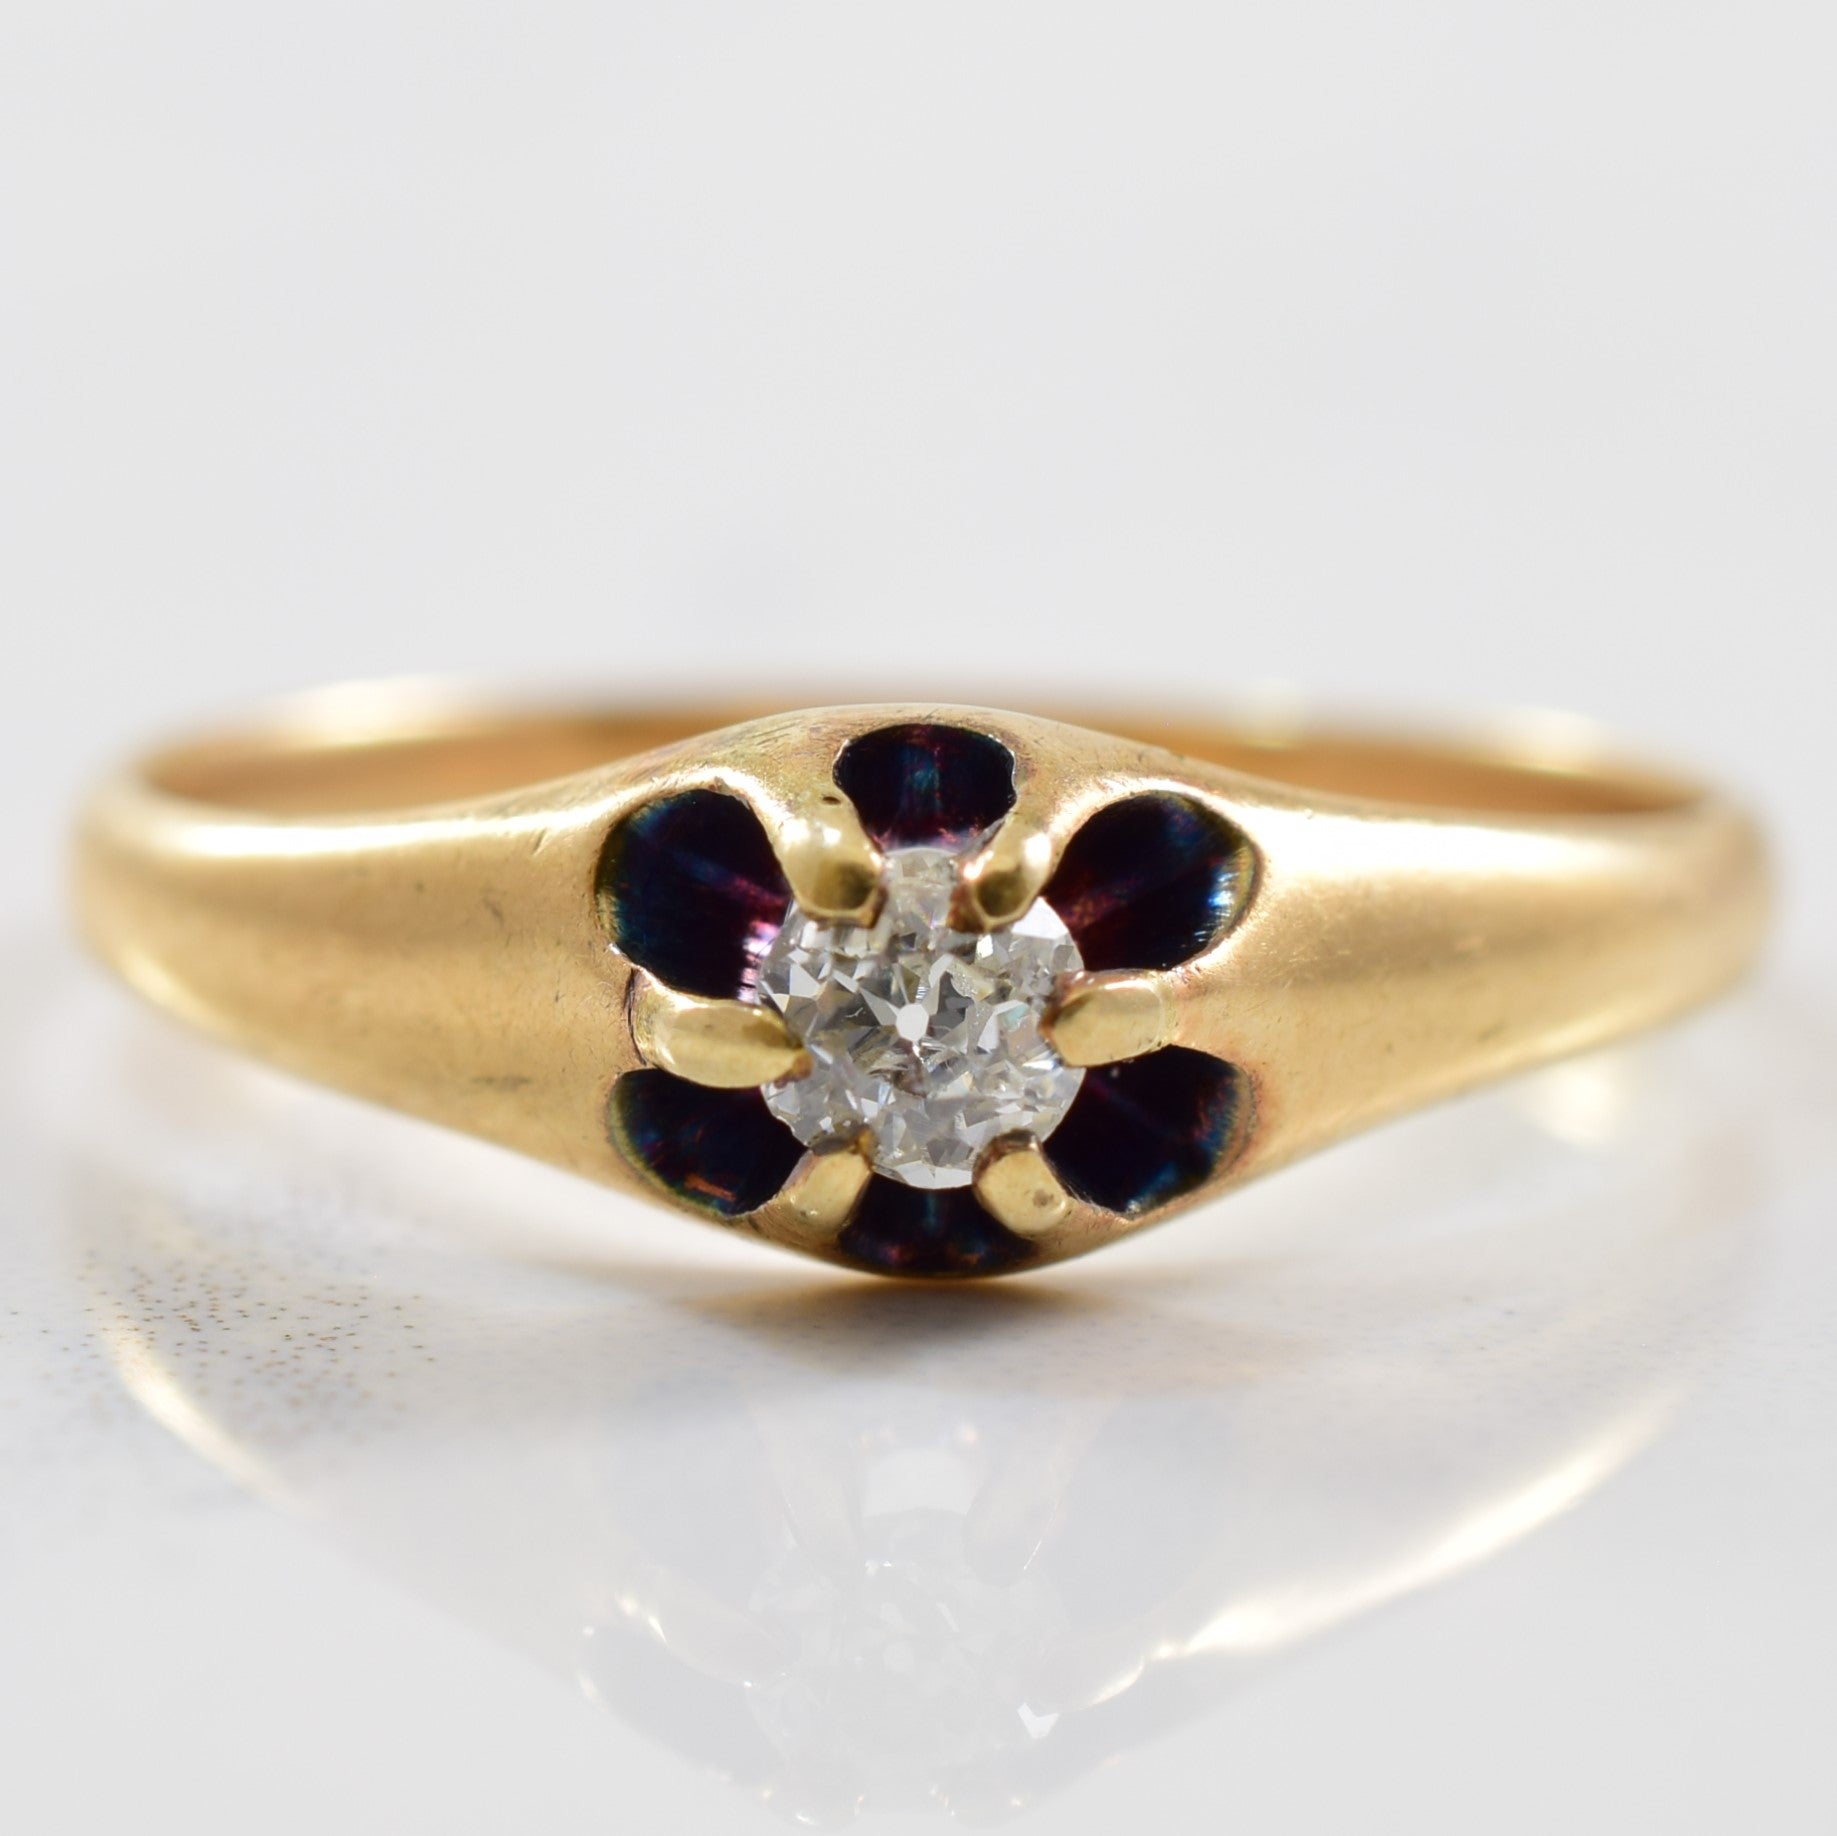 Early 1900s Diamond Solitaire Ring | 0.12ct | SZ 6 |